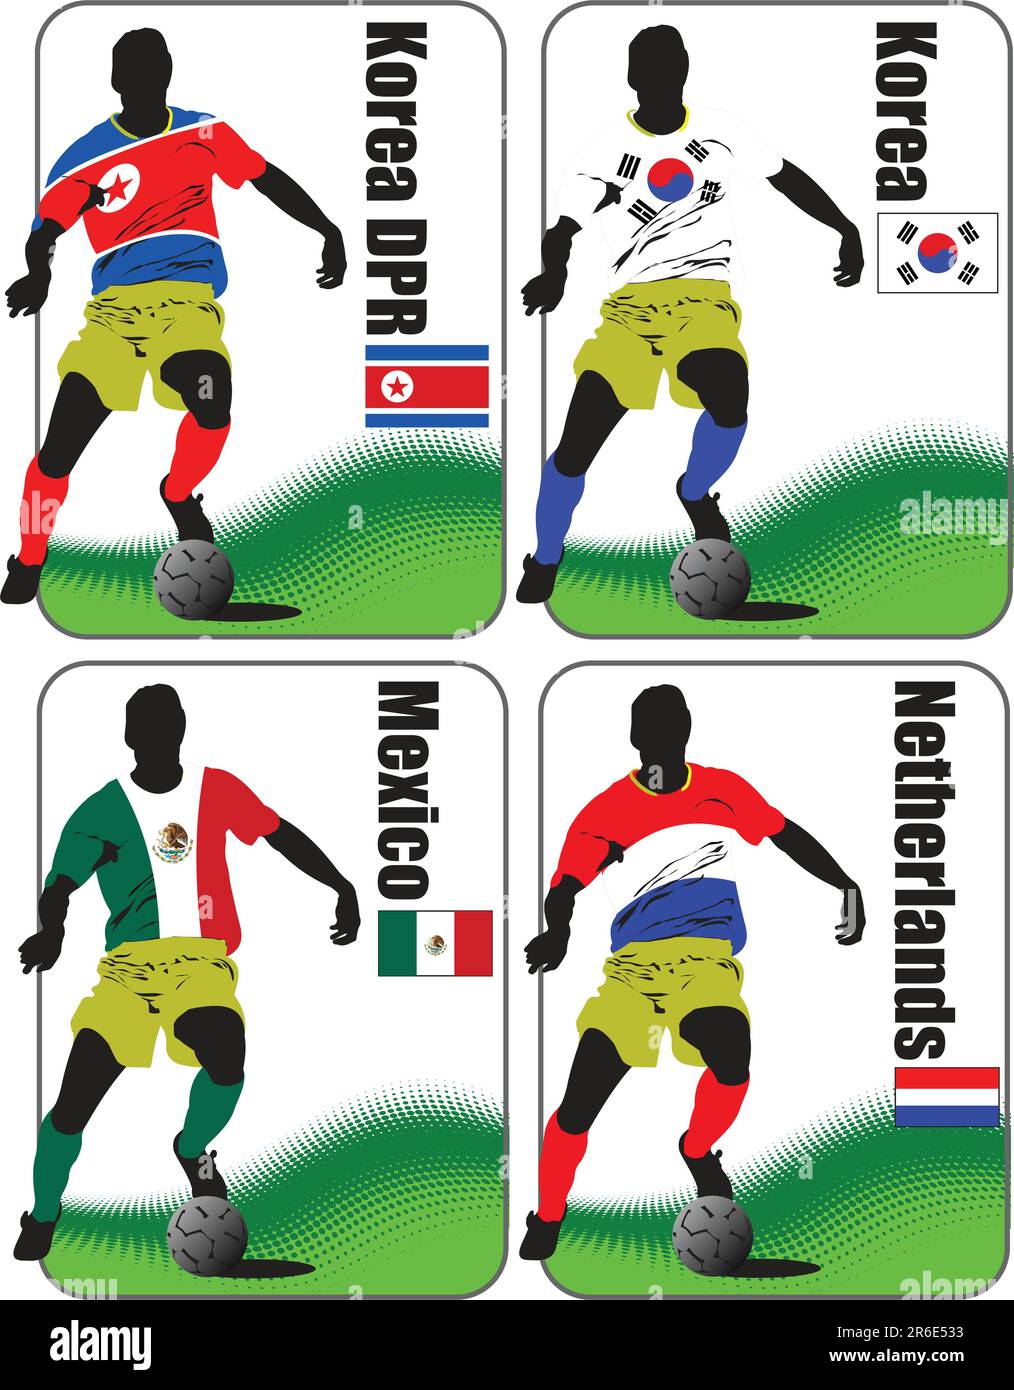 Finals of the World Soccer Cup 2010. 32 teams in T-shirts of the national flags. Korea DPR, Korea, Mexico, Nederland Stock Vector